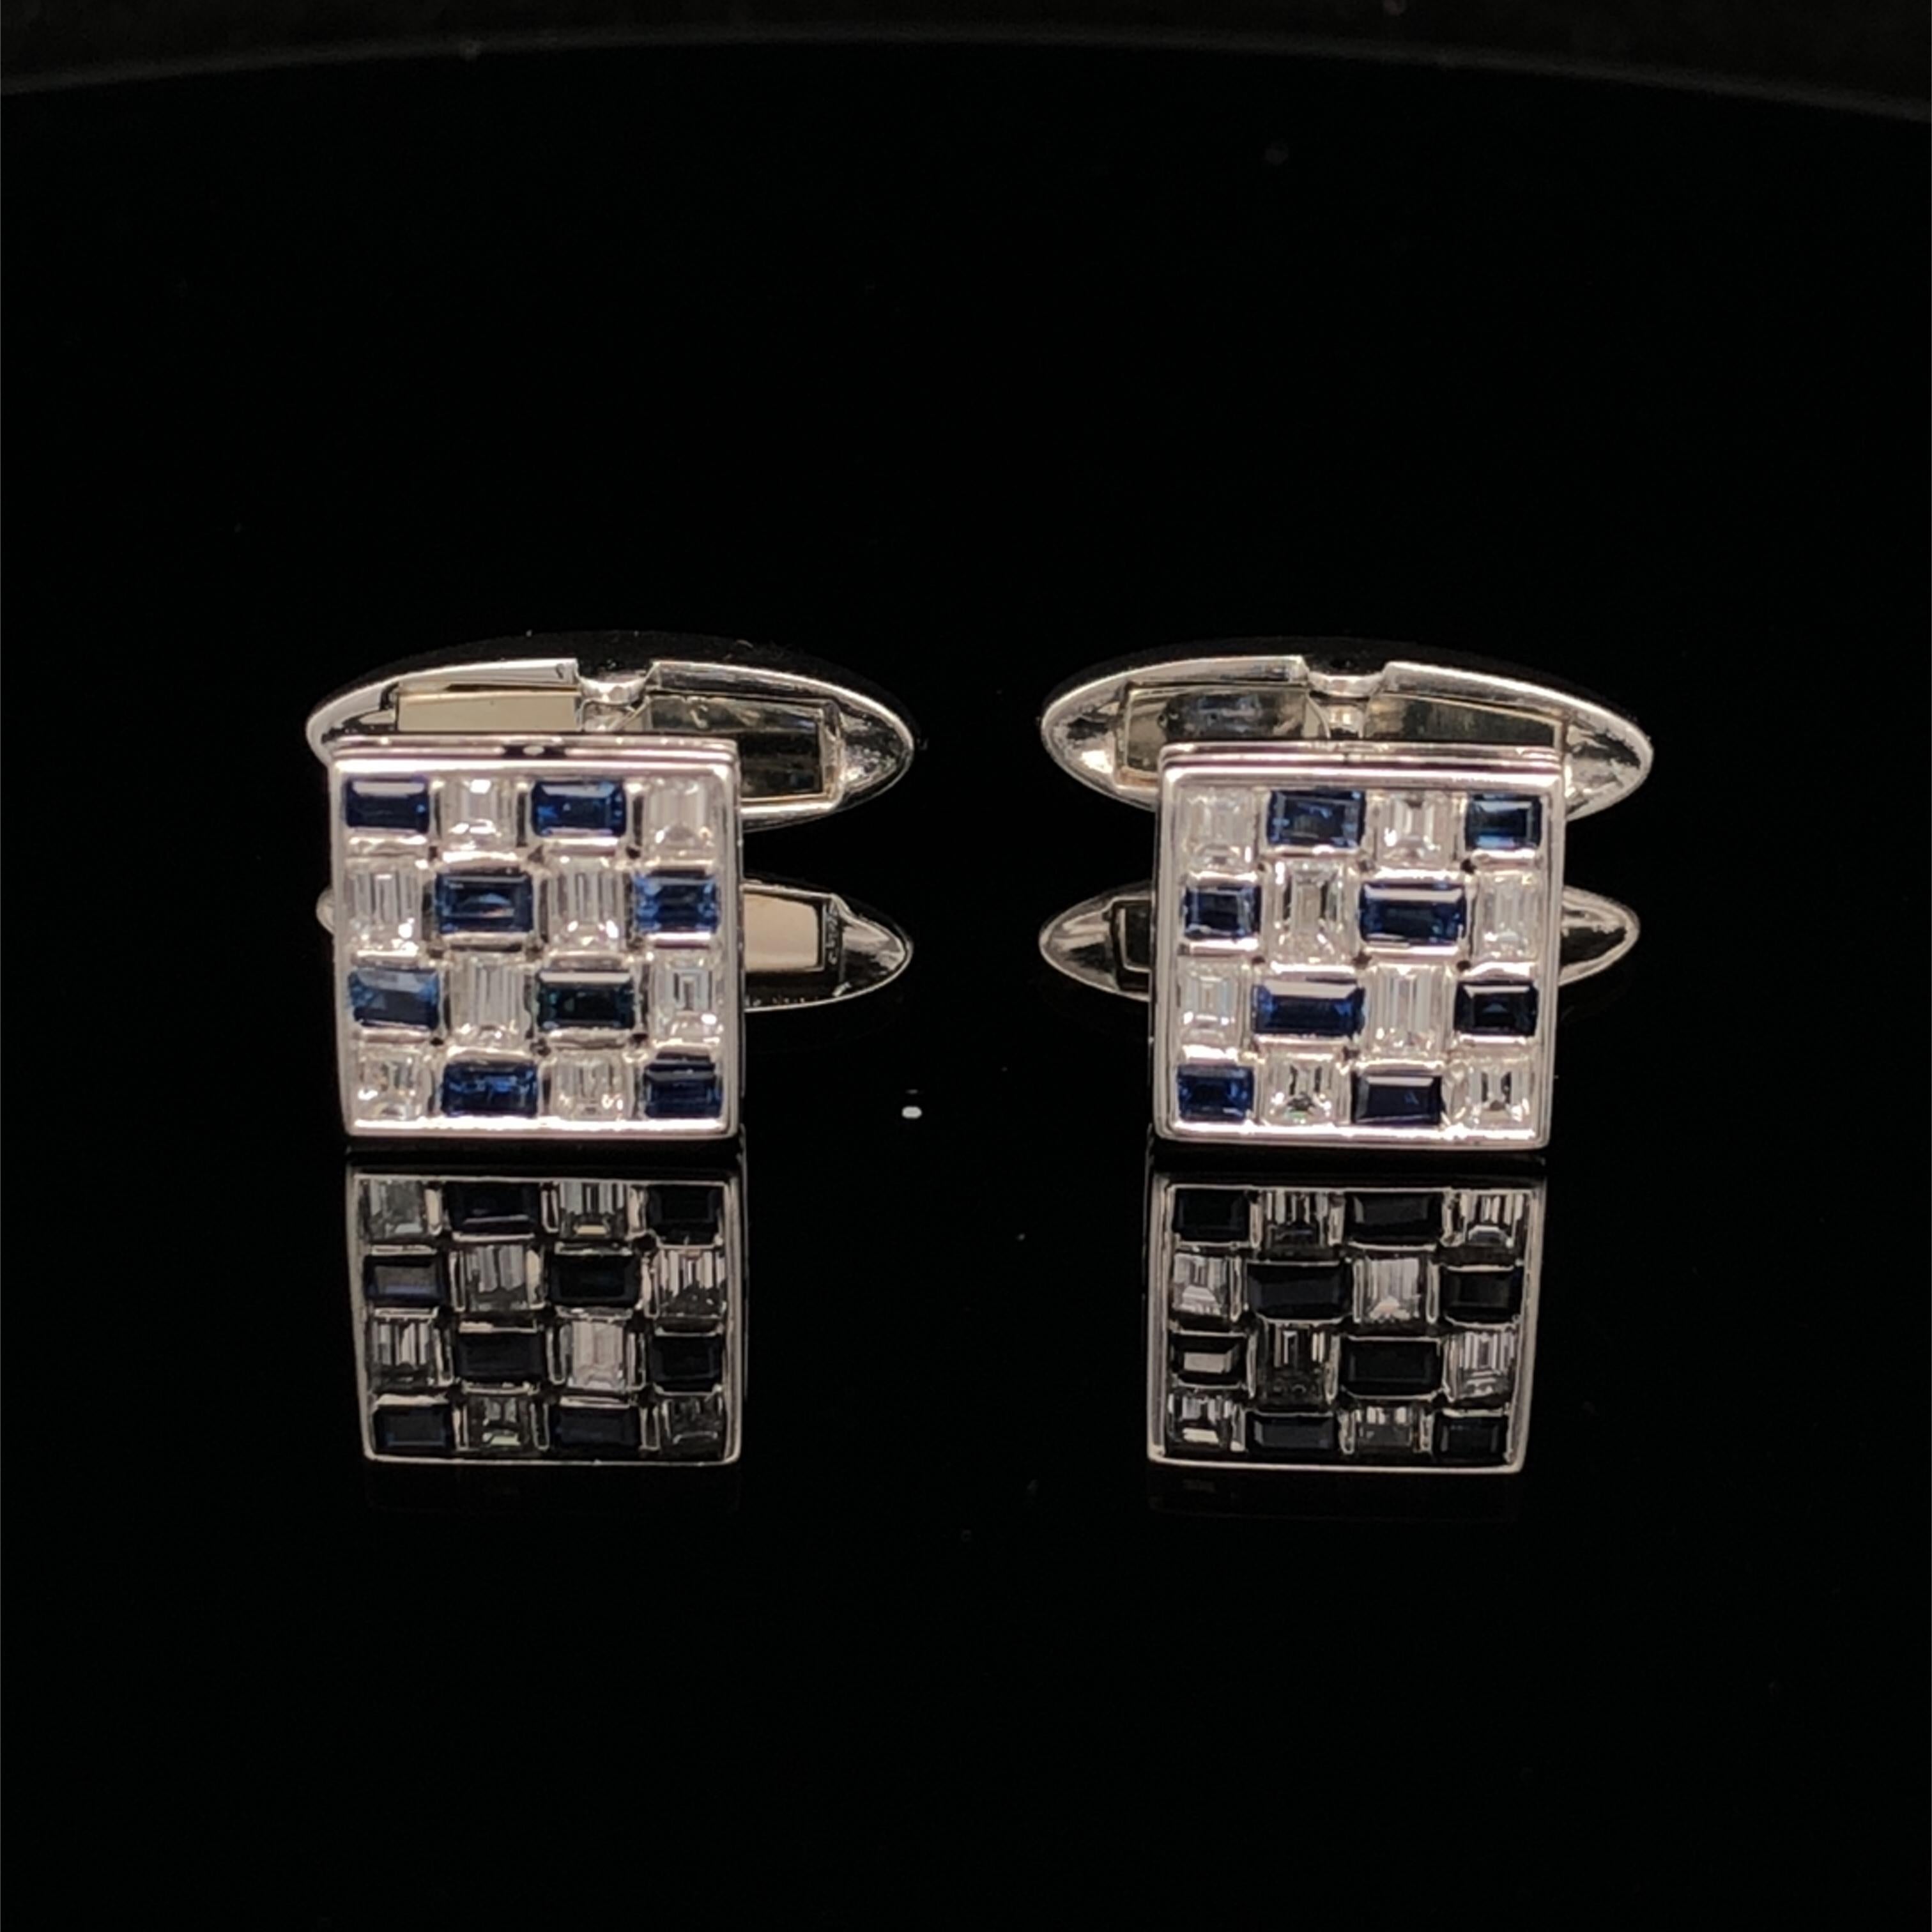 Oscar Heyman platinum cufflinks contain 16 baguette diamonds weighing 1.00tcw and 18 baguette diamonds weighing 0.88tcw set in a woven motif. These elegant cufflinks measure 10mm x 10mm with a total depth (including the back plate) of 21mm. They are